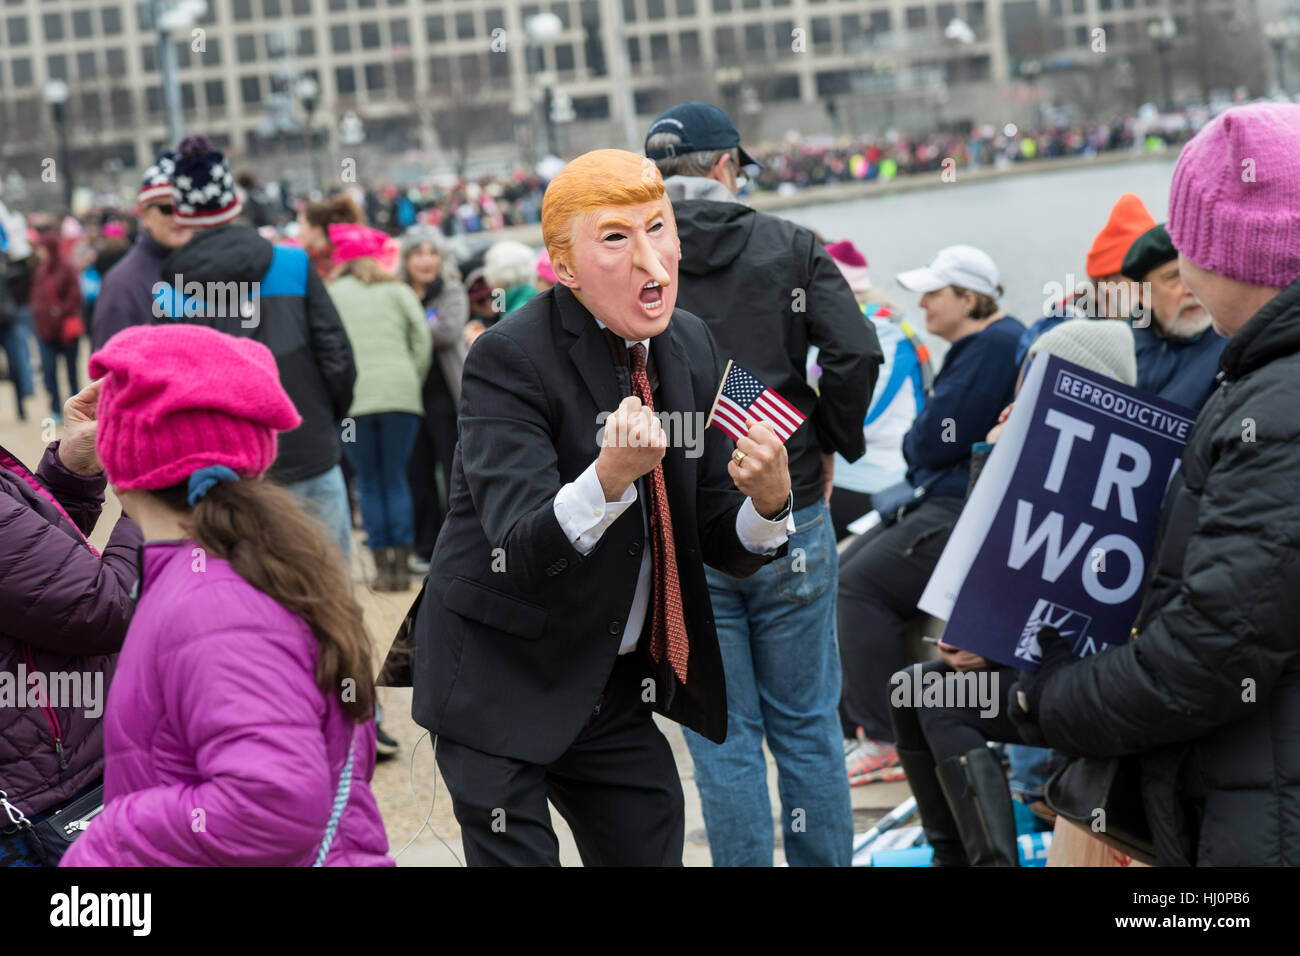 Washington, USA. 21st Jan, 2017.A demonstrator wearing a Donald Trump costume during the Women's March on Washingtonin Washington, DC. More than 500,000 people crammed the National Mall in a peaceful and festival rally in a rebuke of the new president. Credit: Planetpix/Alamy Live News Stock Photo